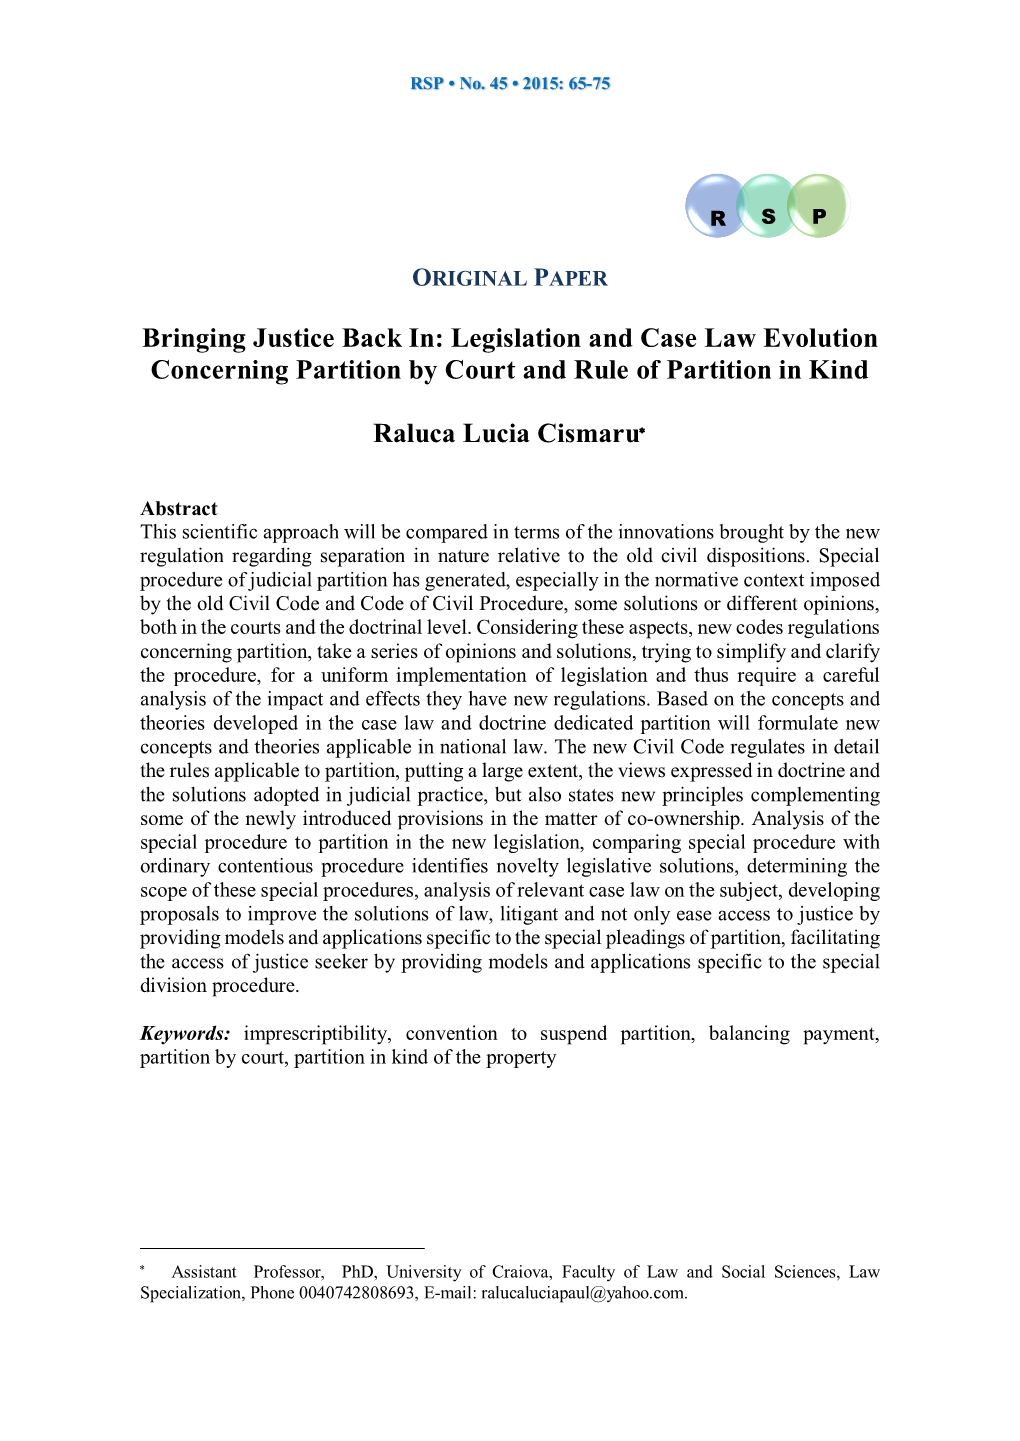 Bringing Justice Back In: Legislation and Case Law Evolution Concerning Partition by Court and Rule of Partition in Kind